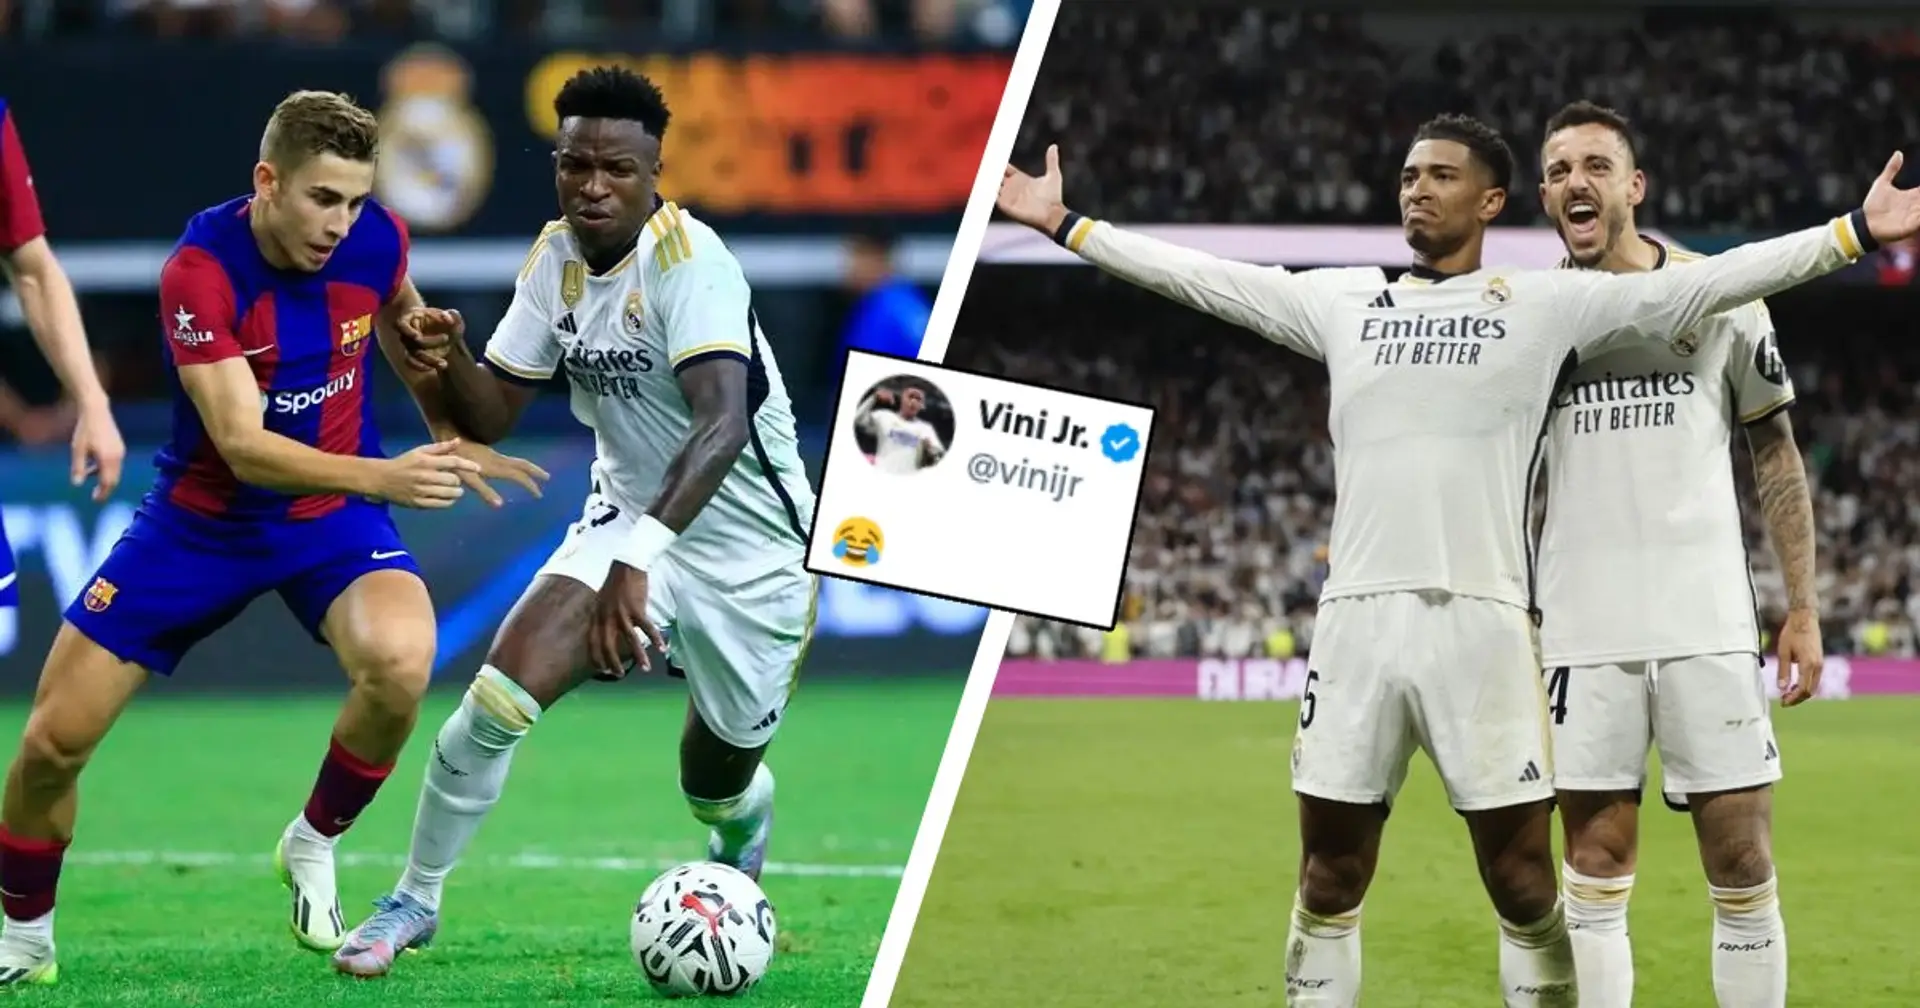 Vinicius rightfully pokes fun at Fermin Lopez - Barca player at fault